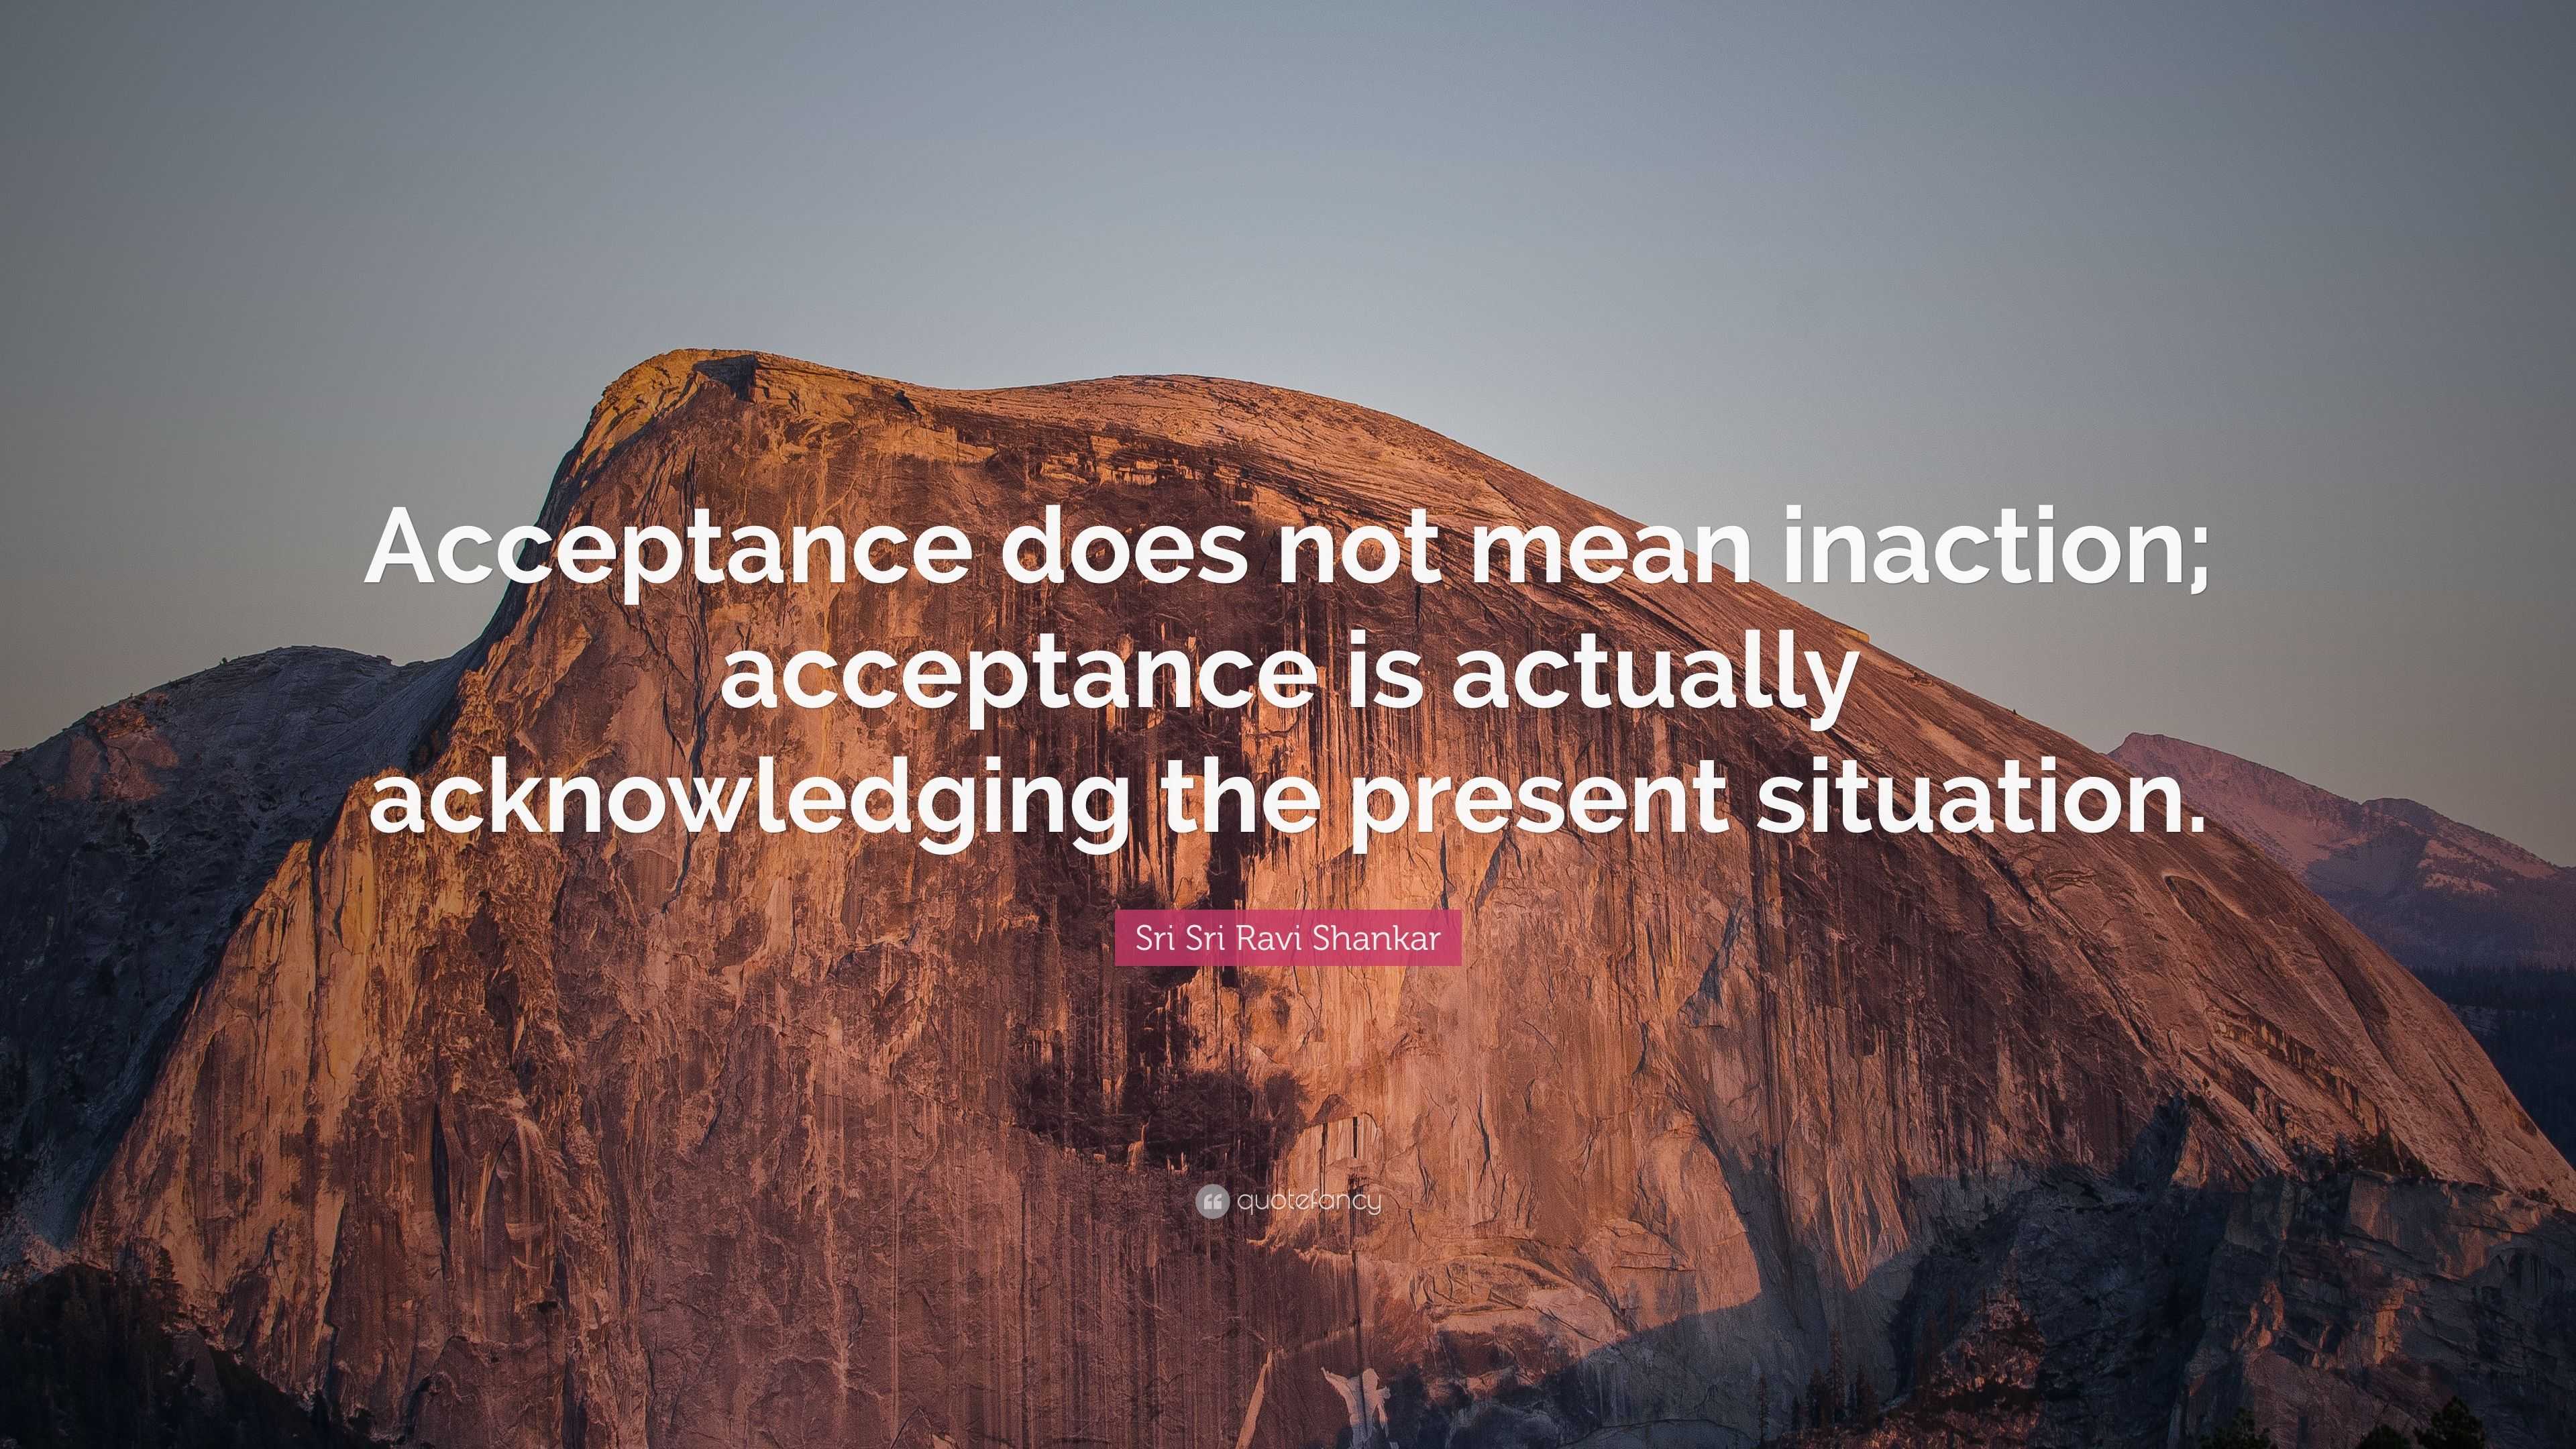 Sri Sri Ravi Shankar Quote: “Acceptance does not mean inaction ...